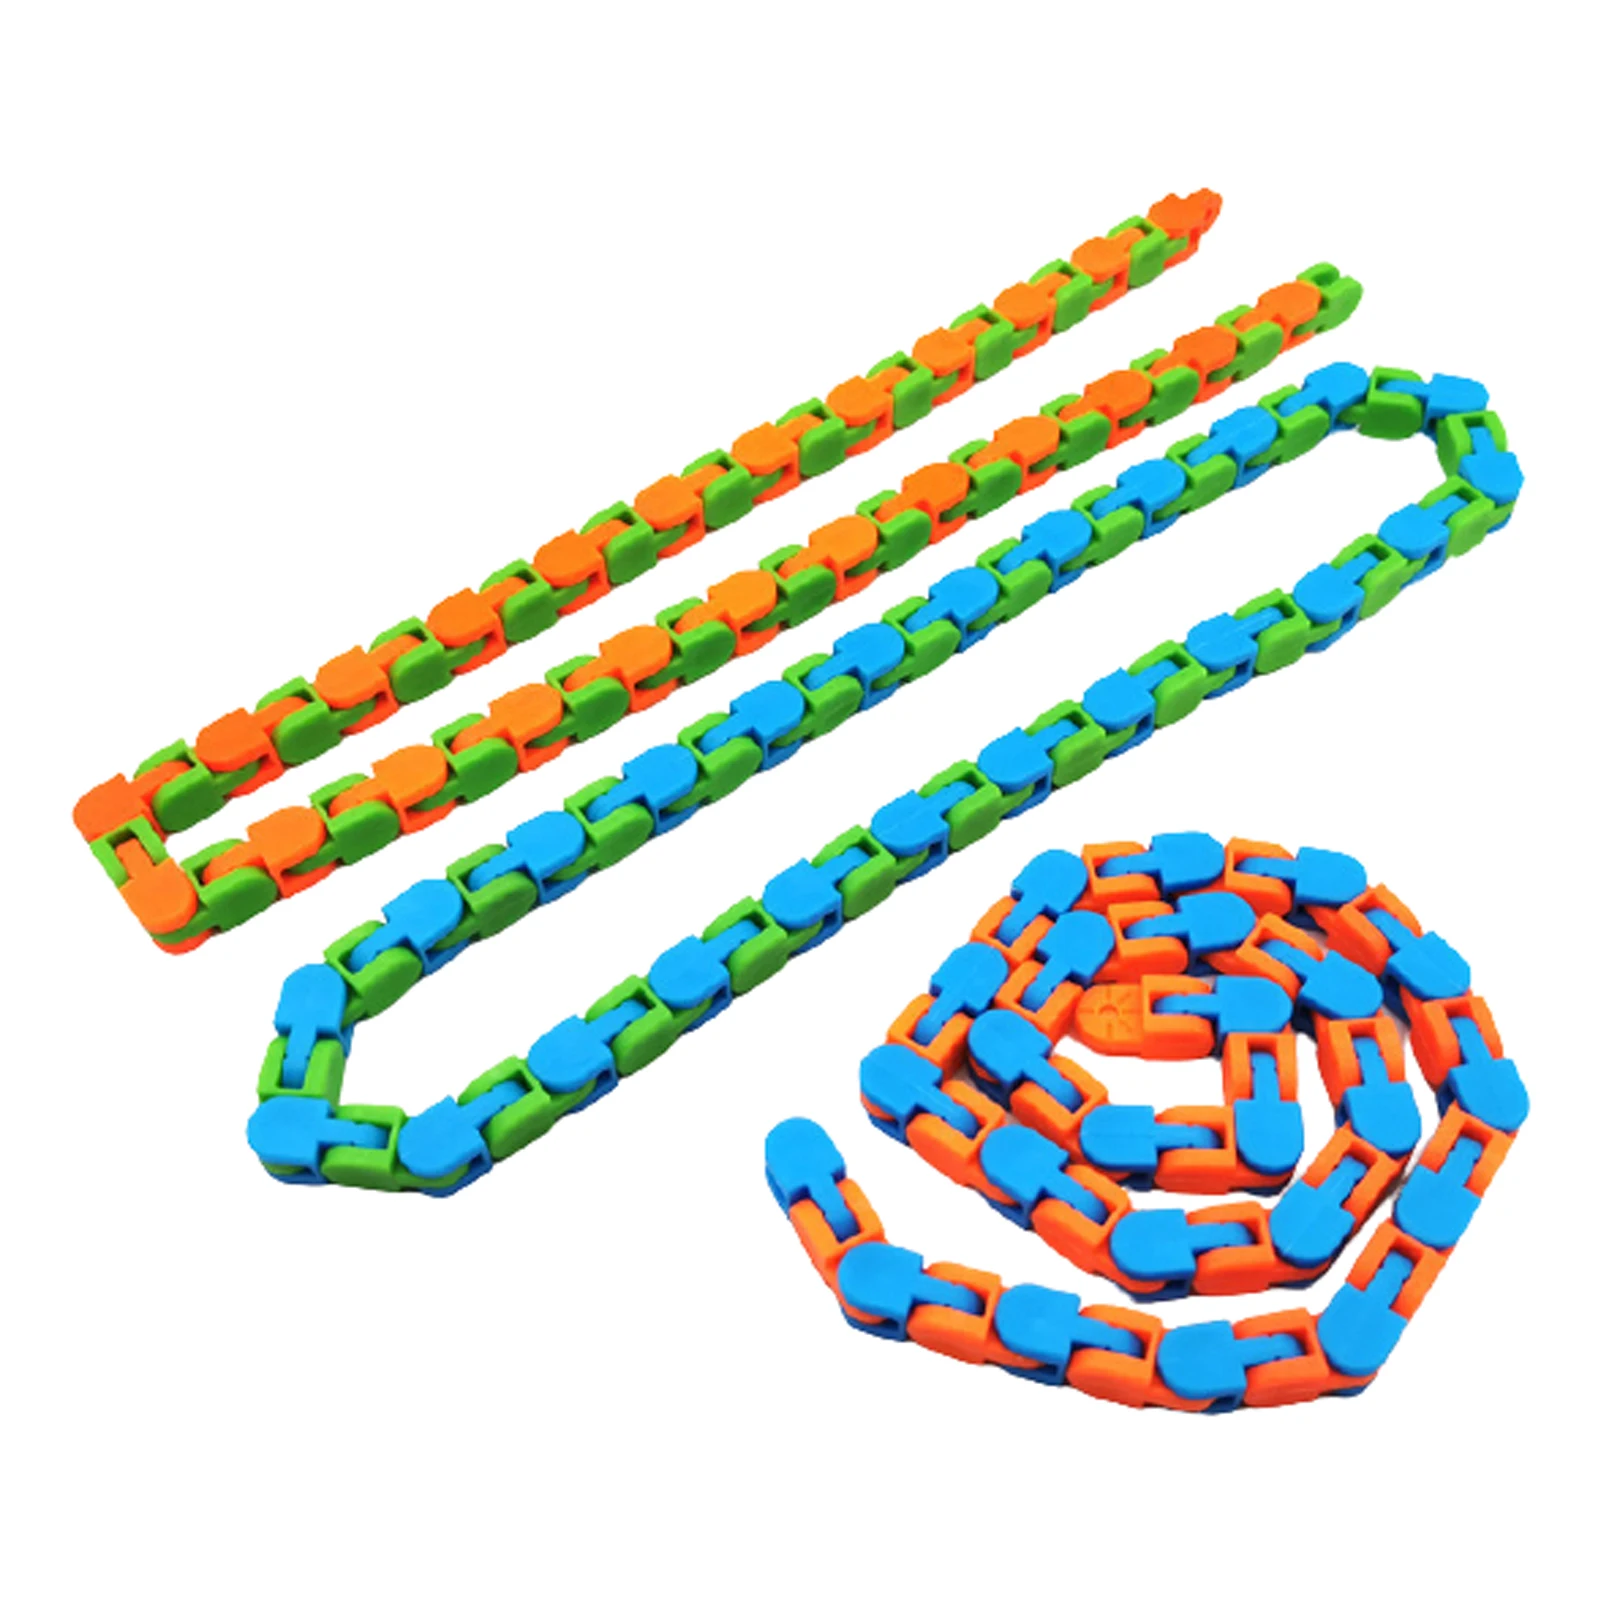 

3pcs/pack Click ADHD Tracks Kids Adults Stress Relief Finger Sensory Wacky Toy Chain Party Anxiety Snake Fidget